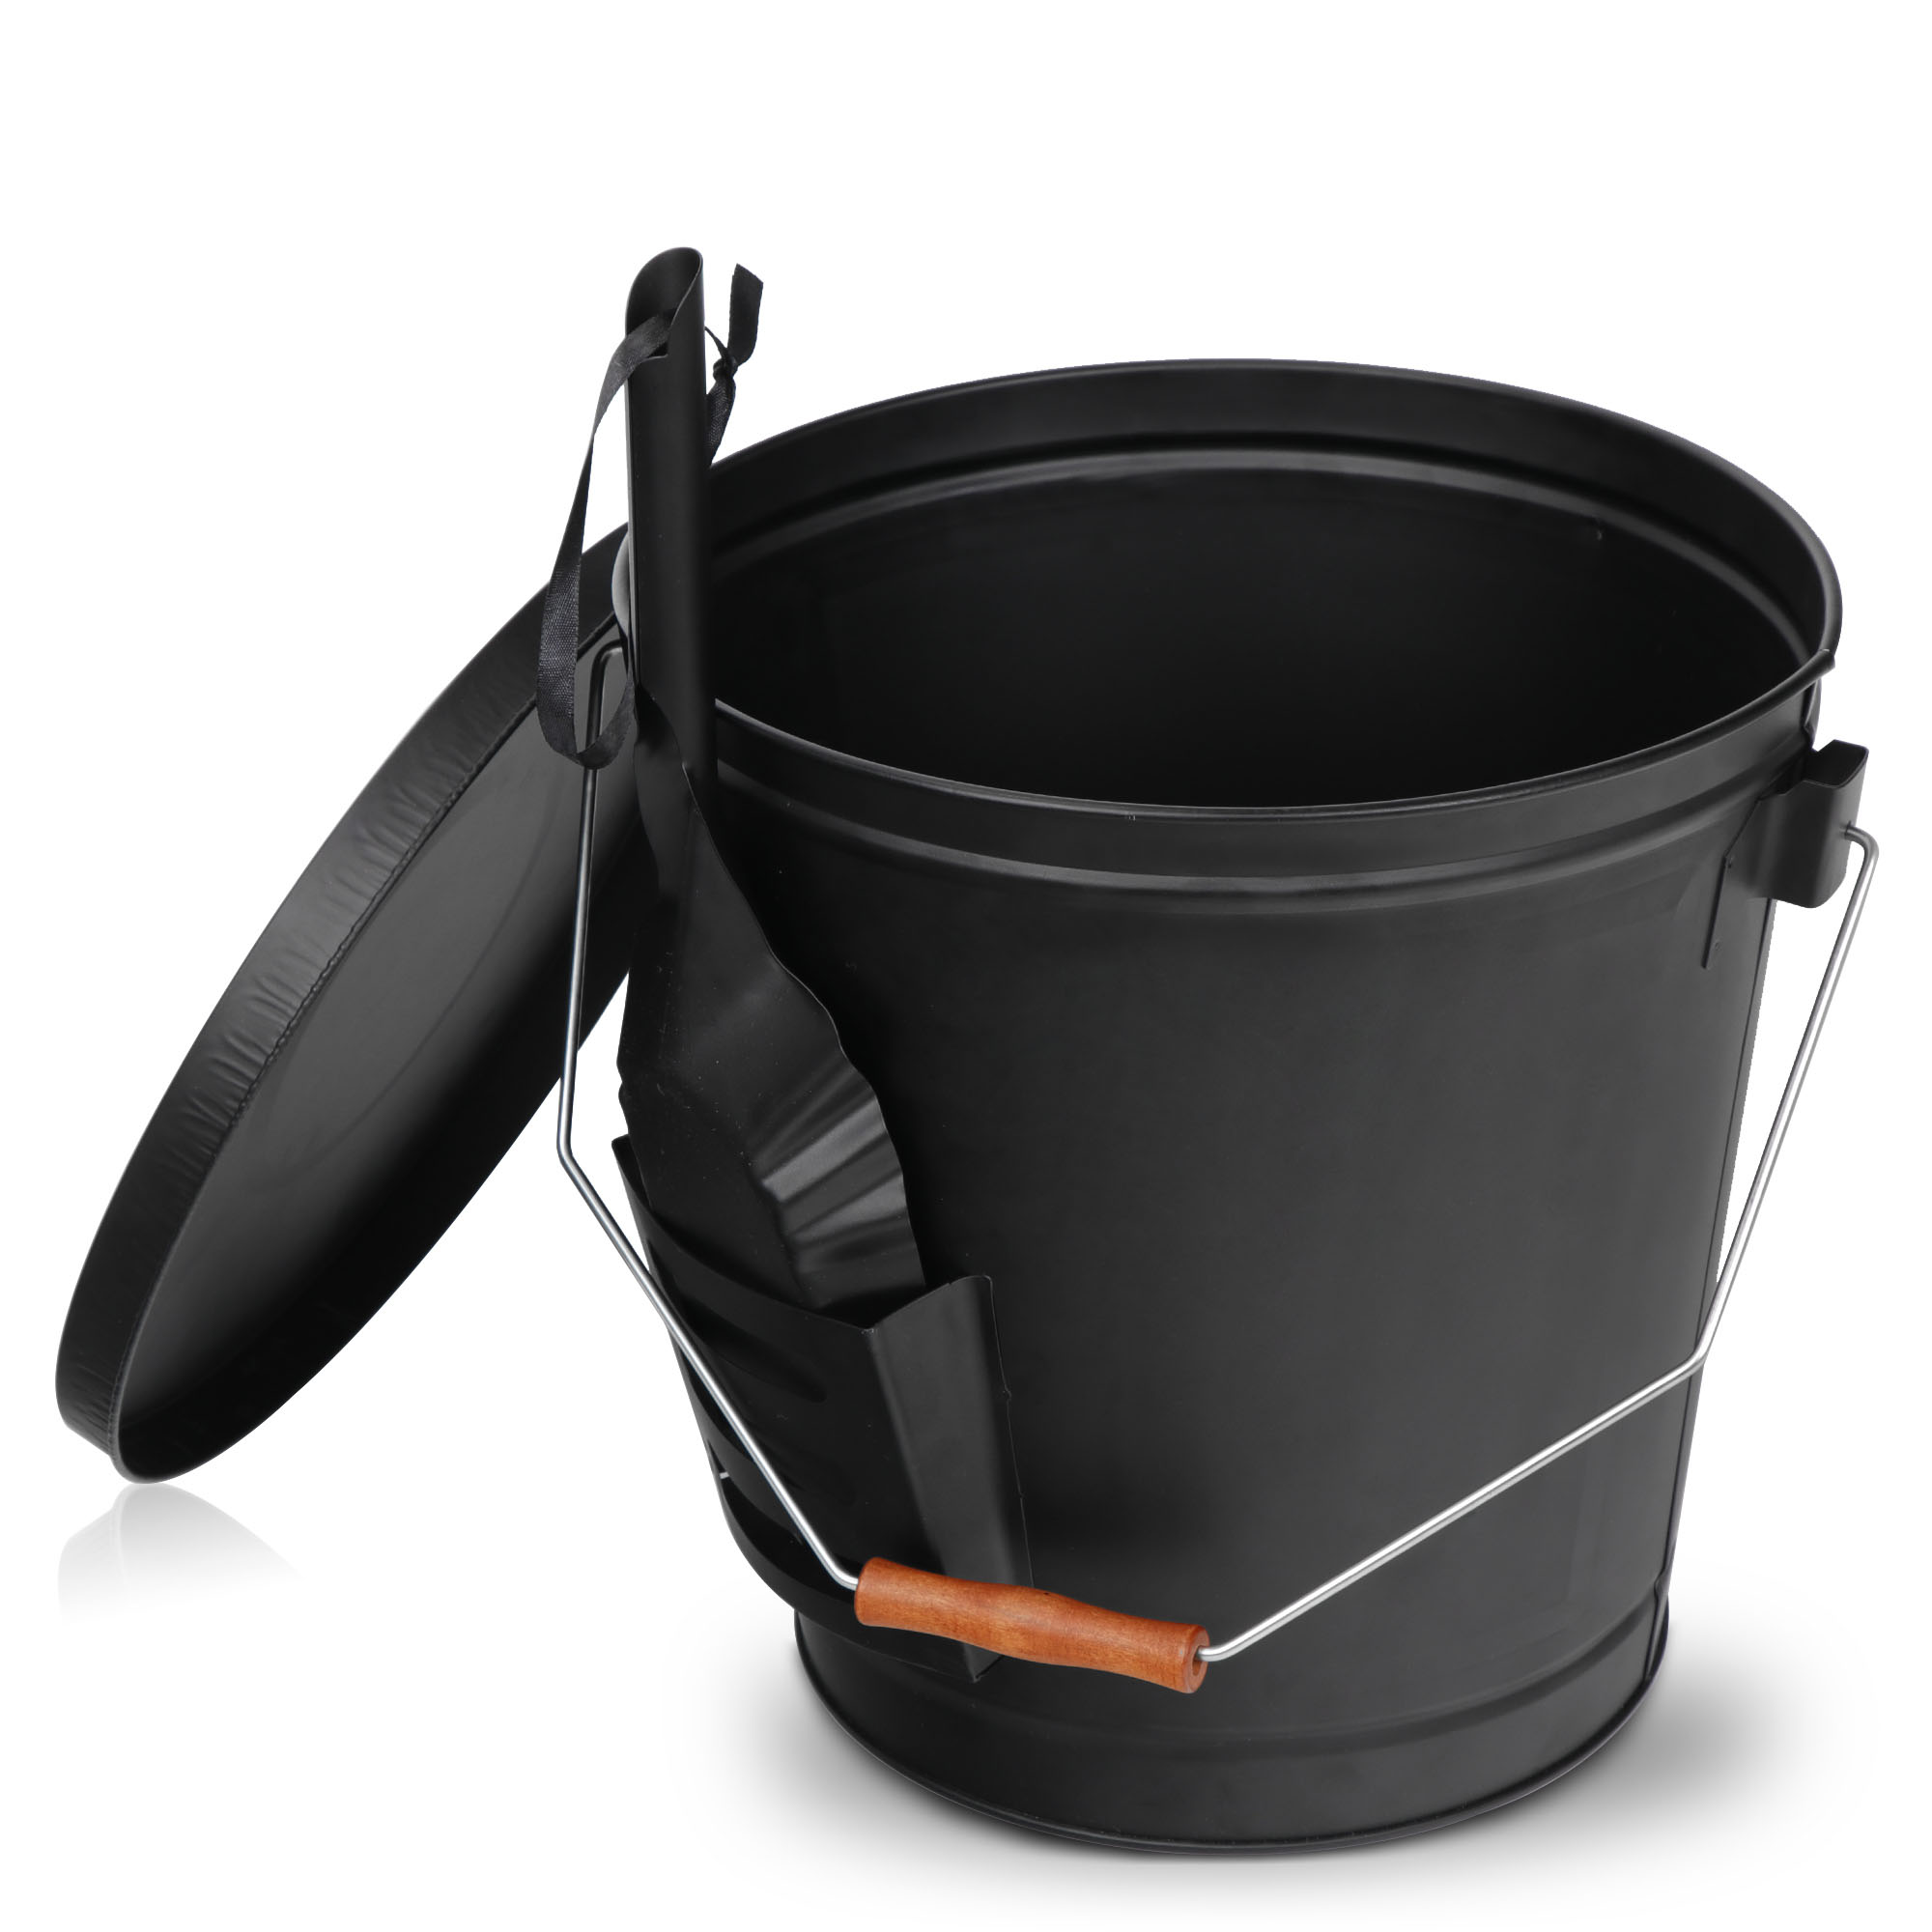 5 Gallon Black Ash Bucket with Lid and Shovel-Essential Tools for  Fireplaces, Fire Pits, Wood Burning Stoves-Hearth Accessories 